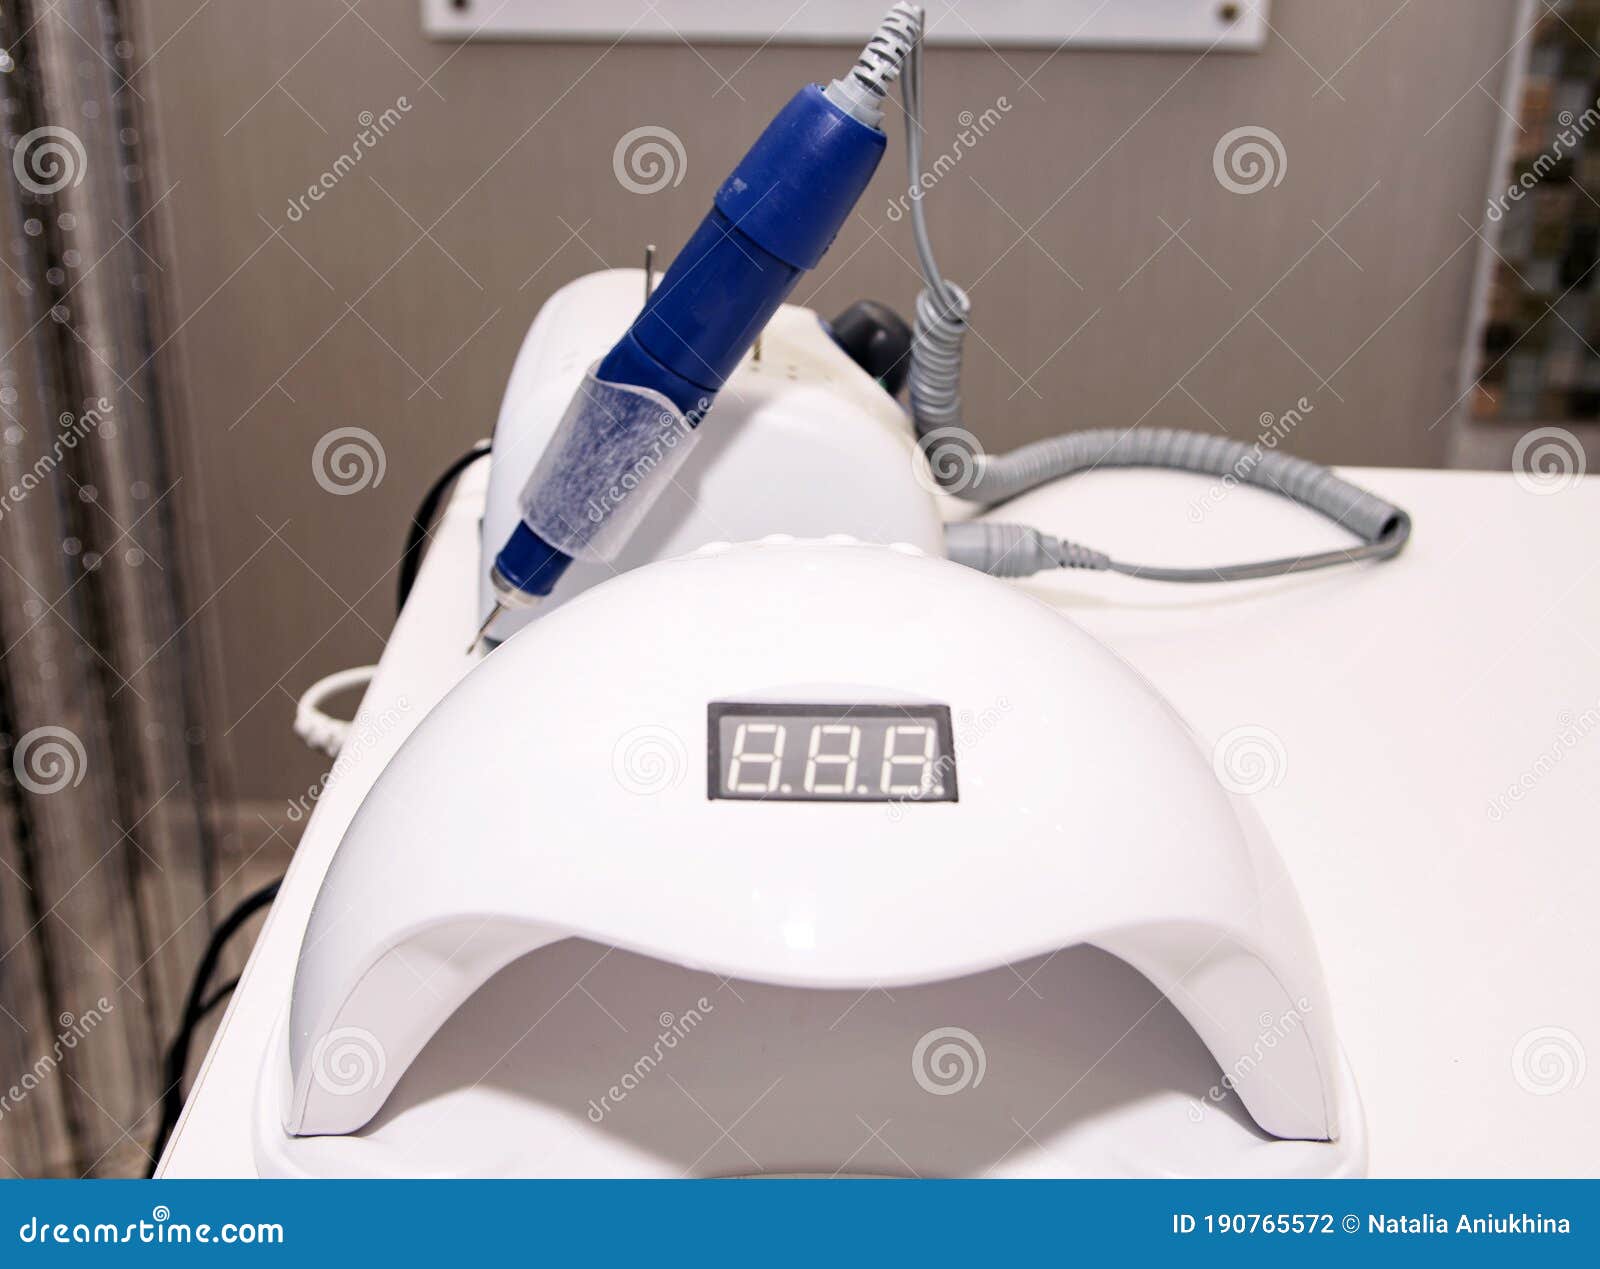 gel polish remover and manicure dryer on a table